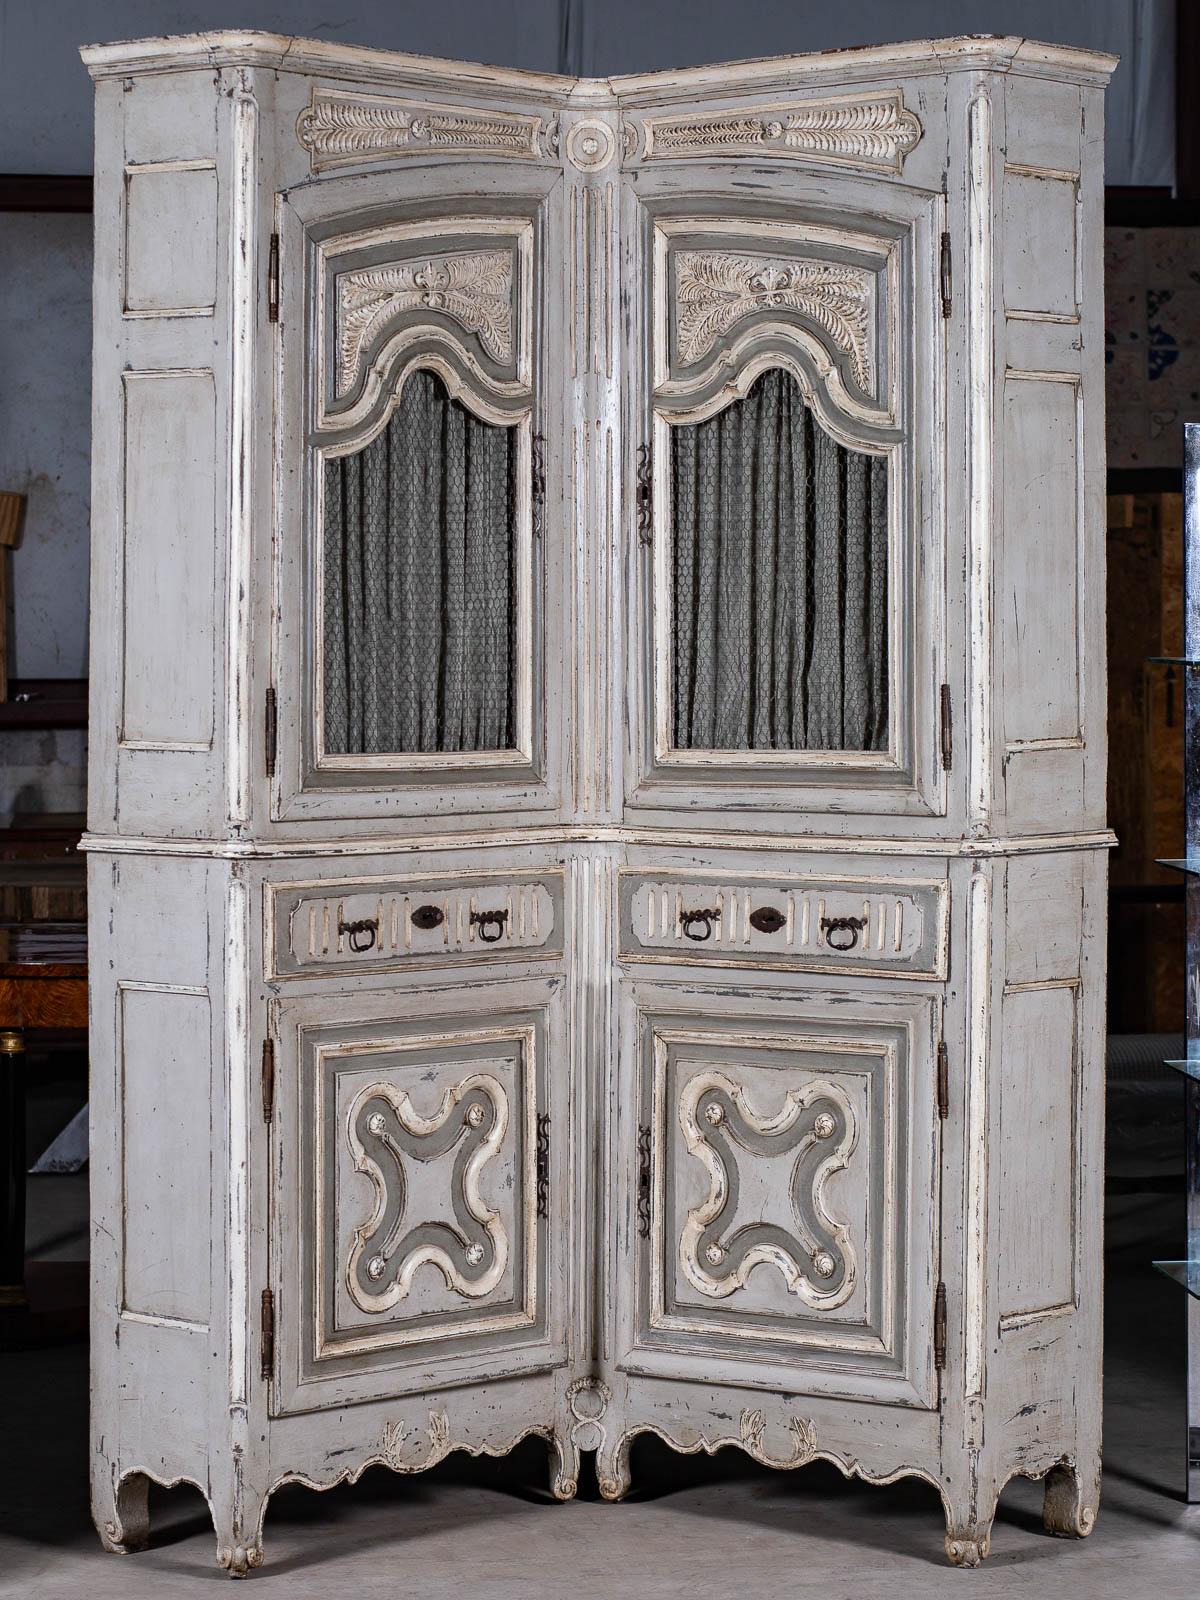 Receive our new selections direct from 1stdibs by email each week. Please click Follow Dealer below and see them first!

A rare and unusual antique French Louis XV period painted corner cabinet or buffet à deux corps, circa 1740. The base of the